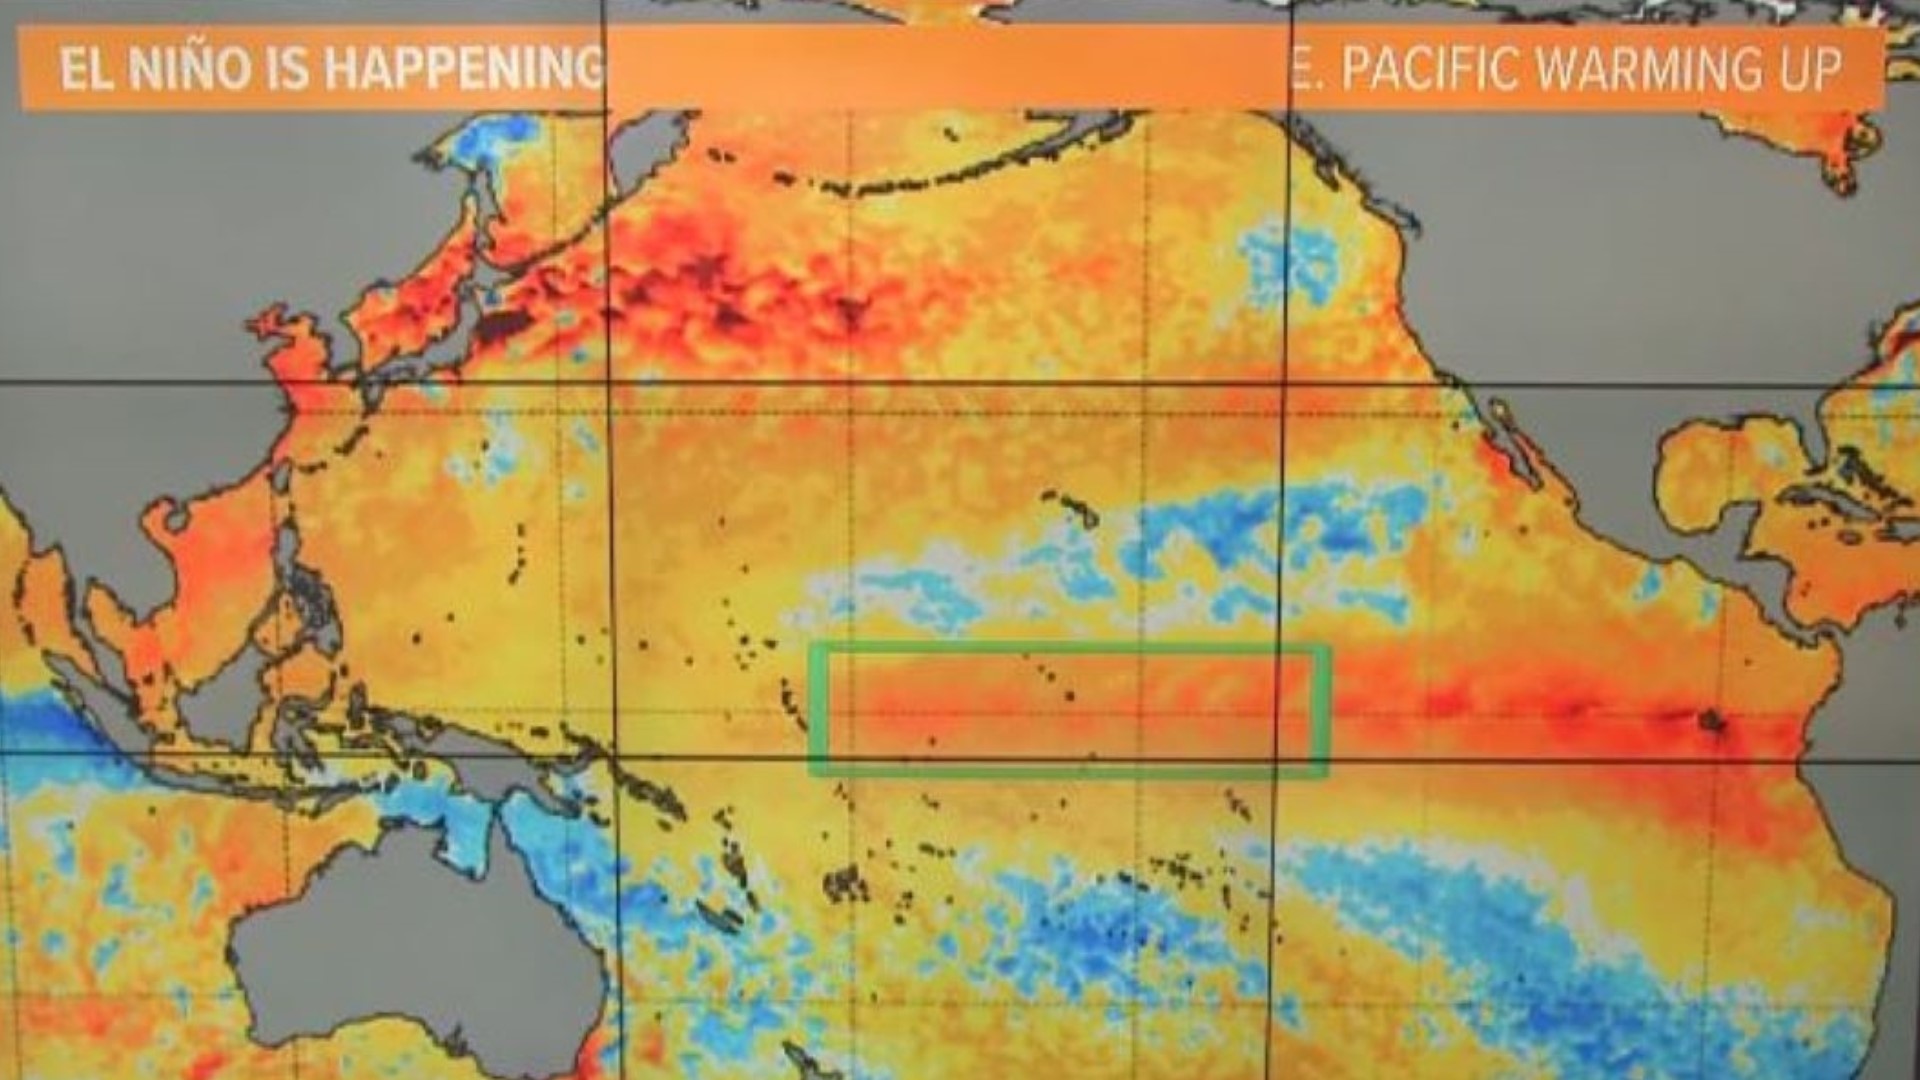 El Niño is continuing to intensify and has reached strong status according to the latest update from NOAA.